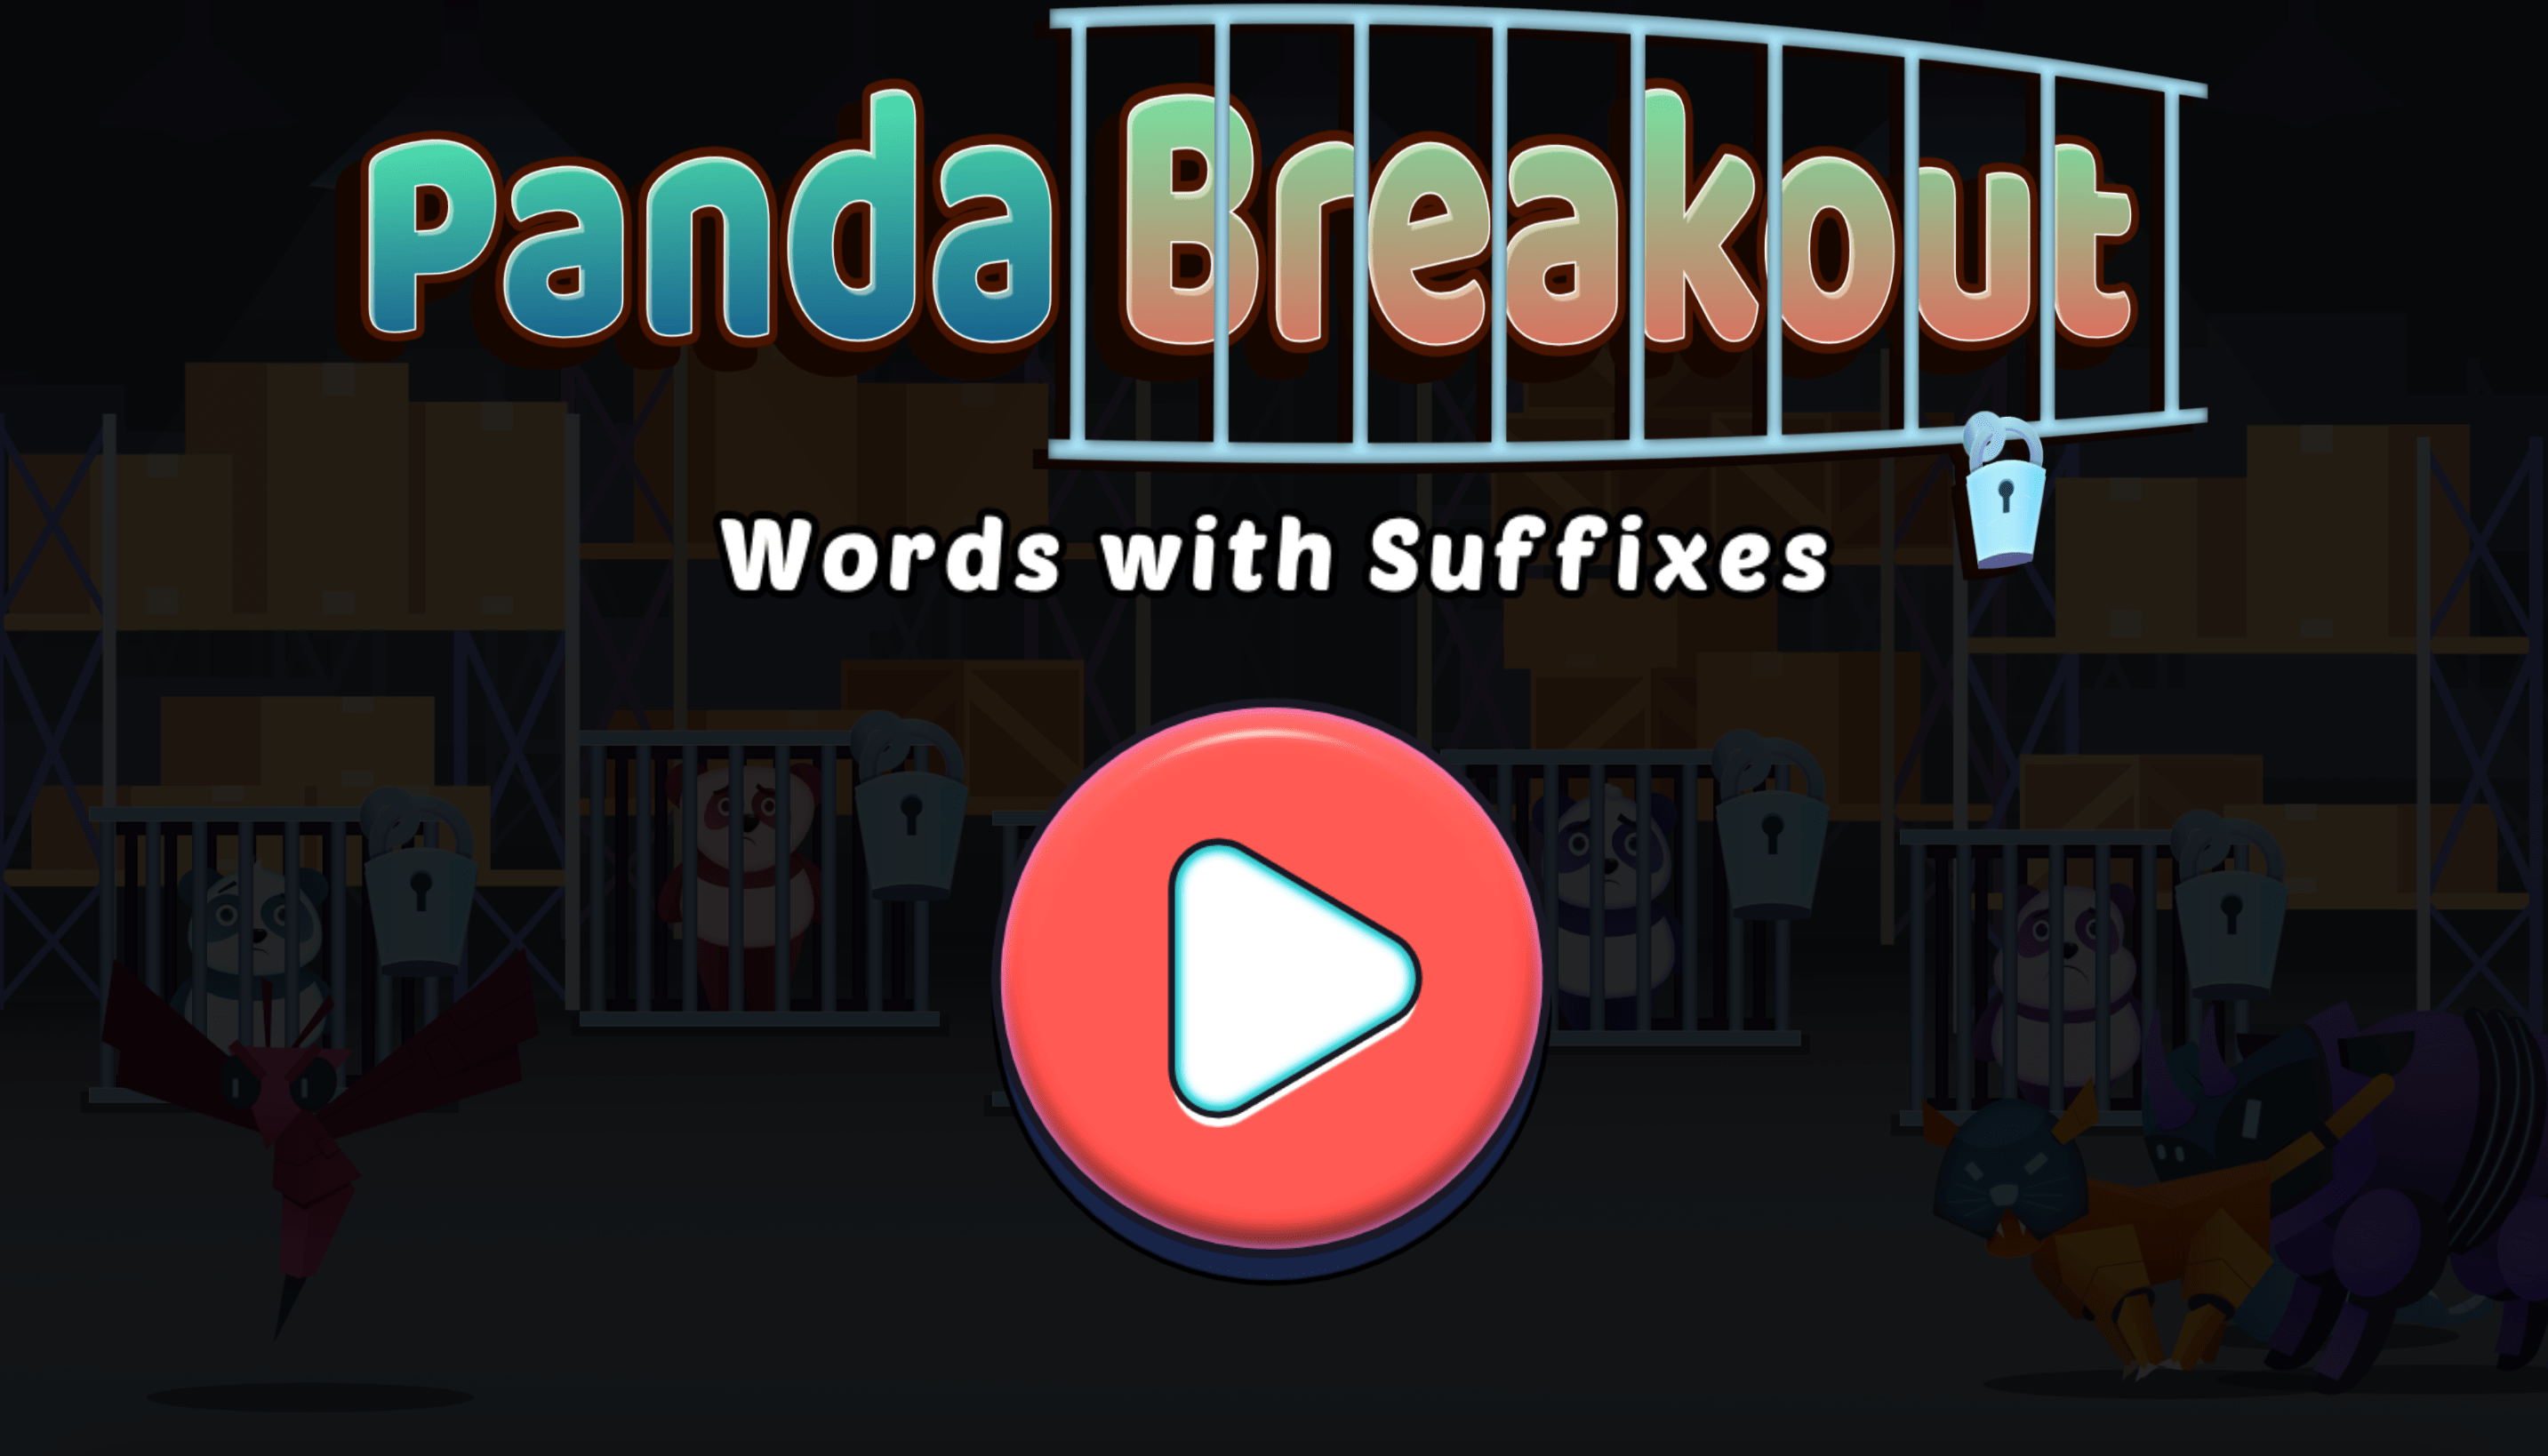 A game start screen with the title "Panda Breakout" and a large play button in the foreground